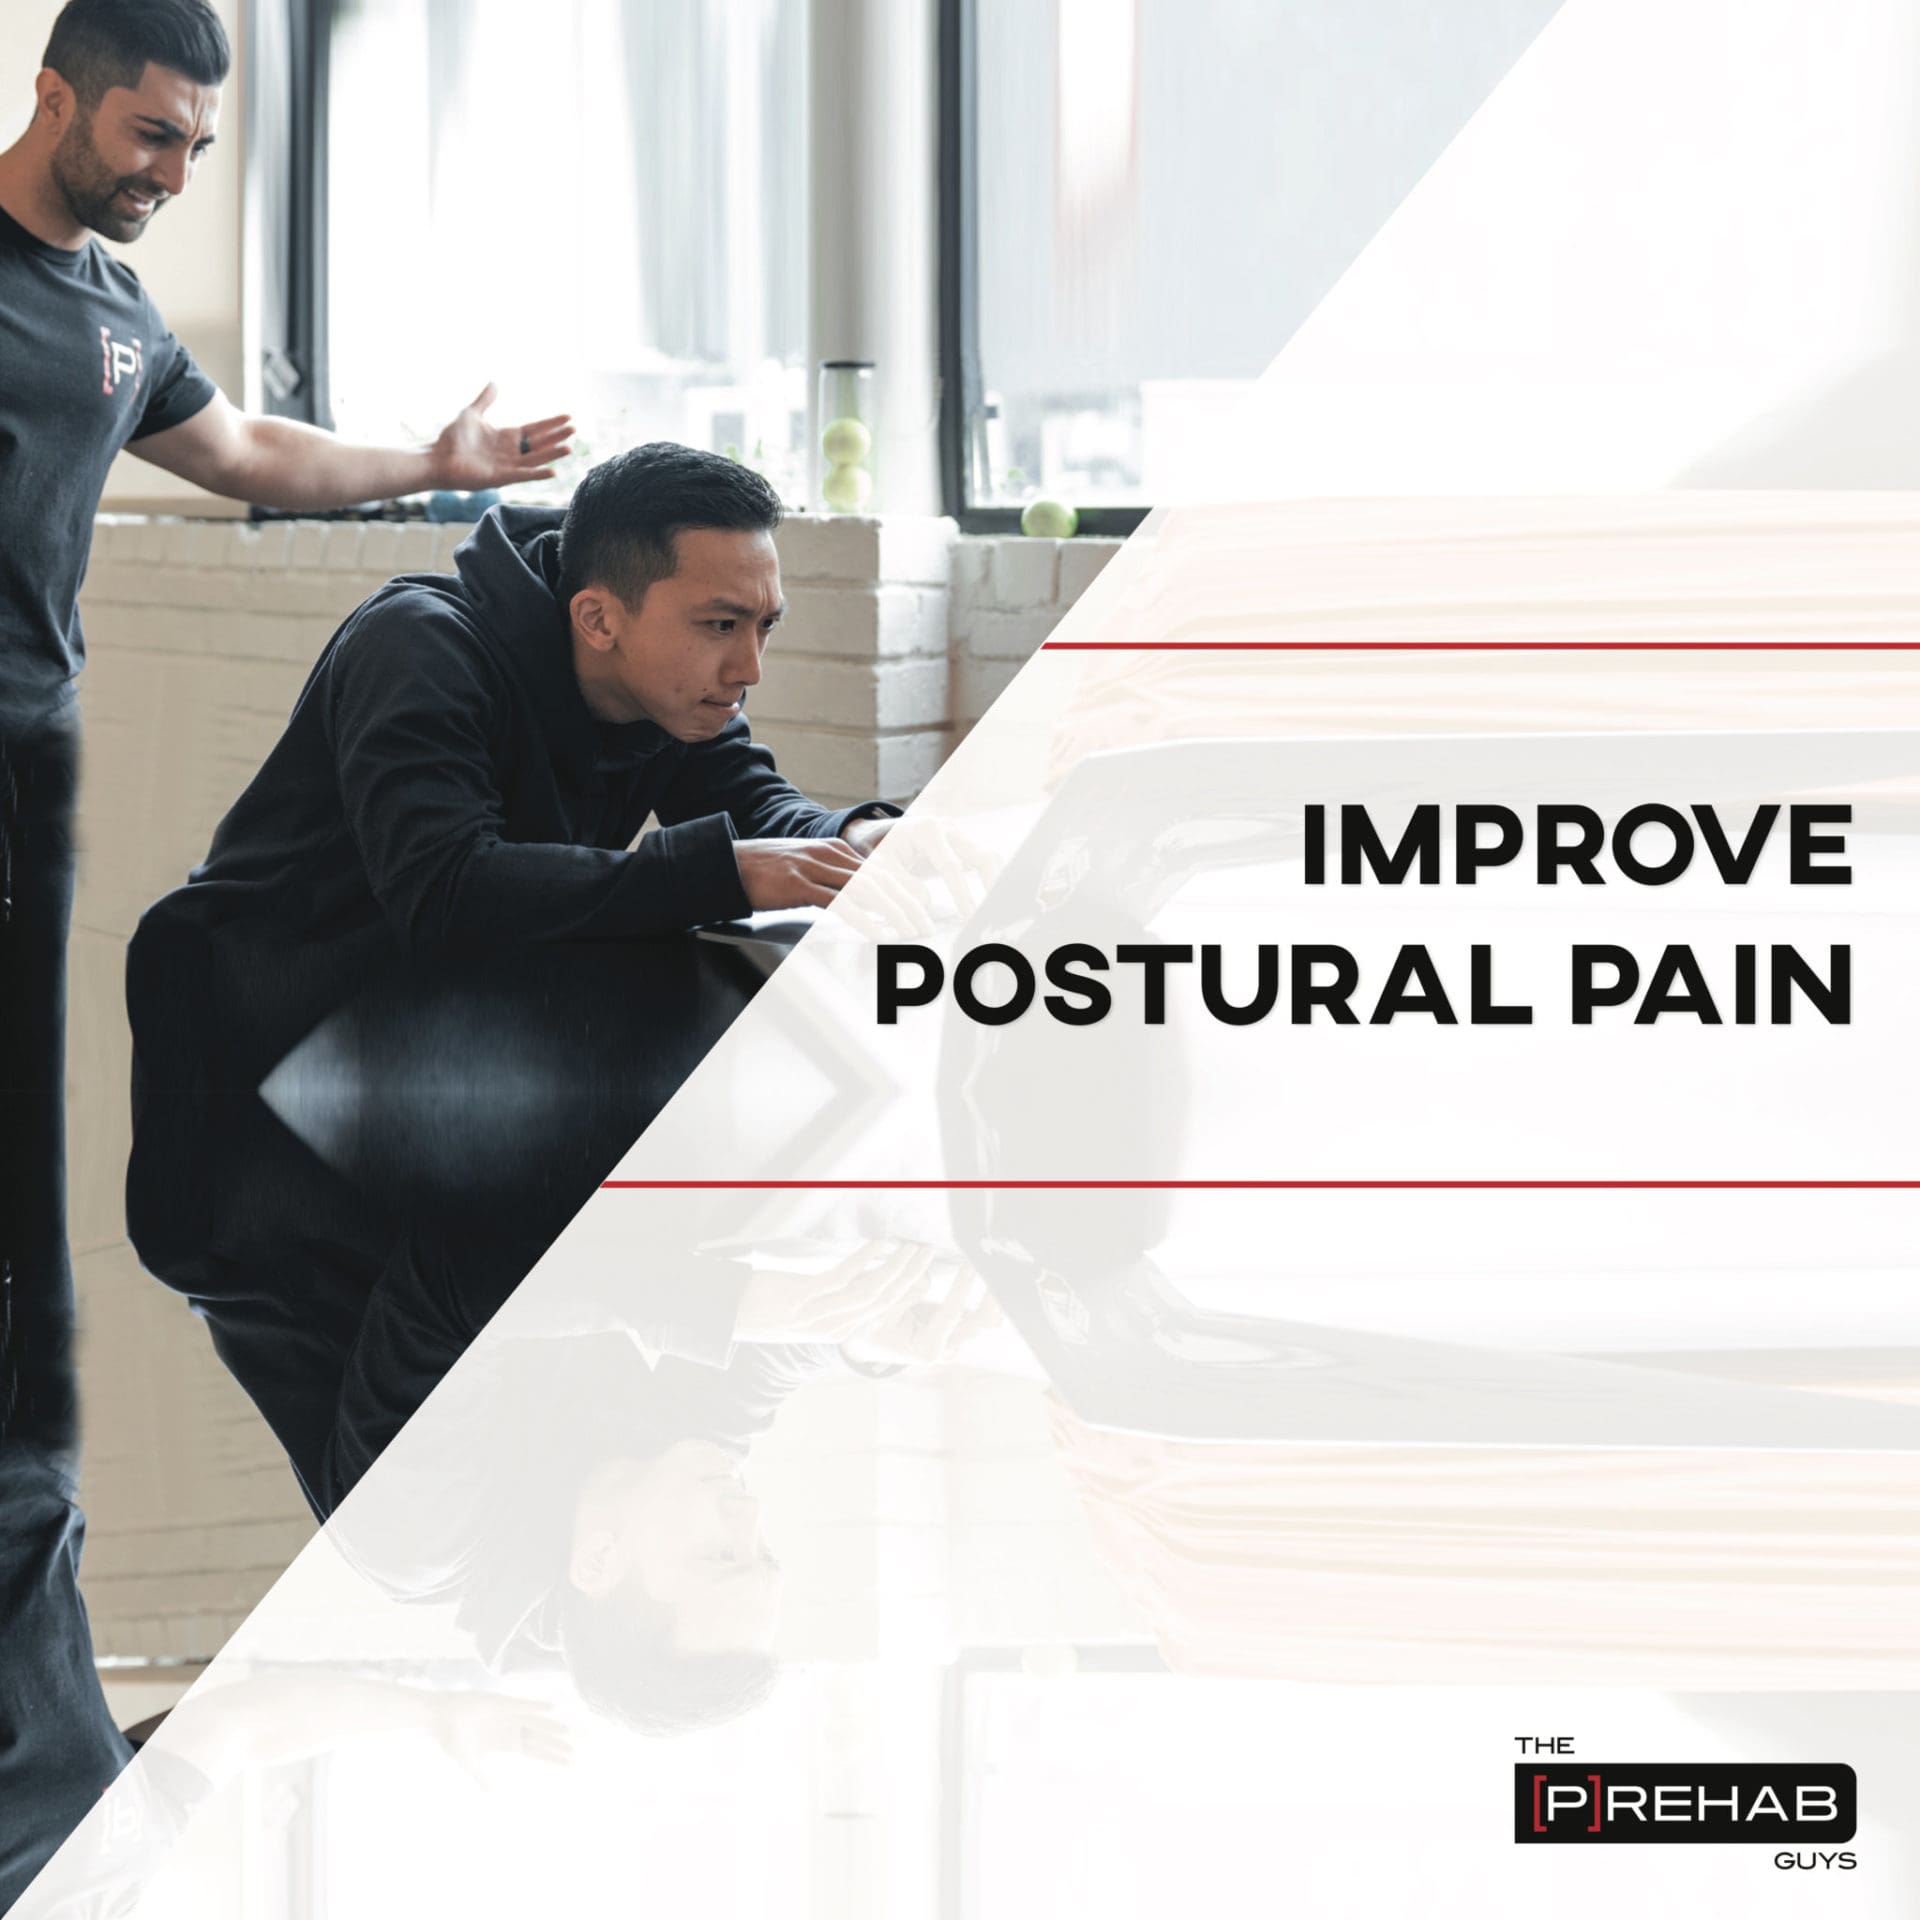 How to fix posture - tweaks to ease pain and boost energy